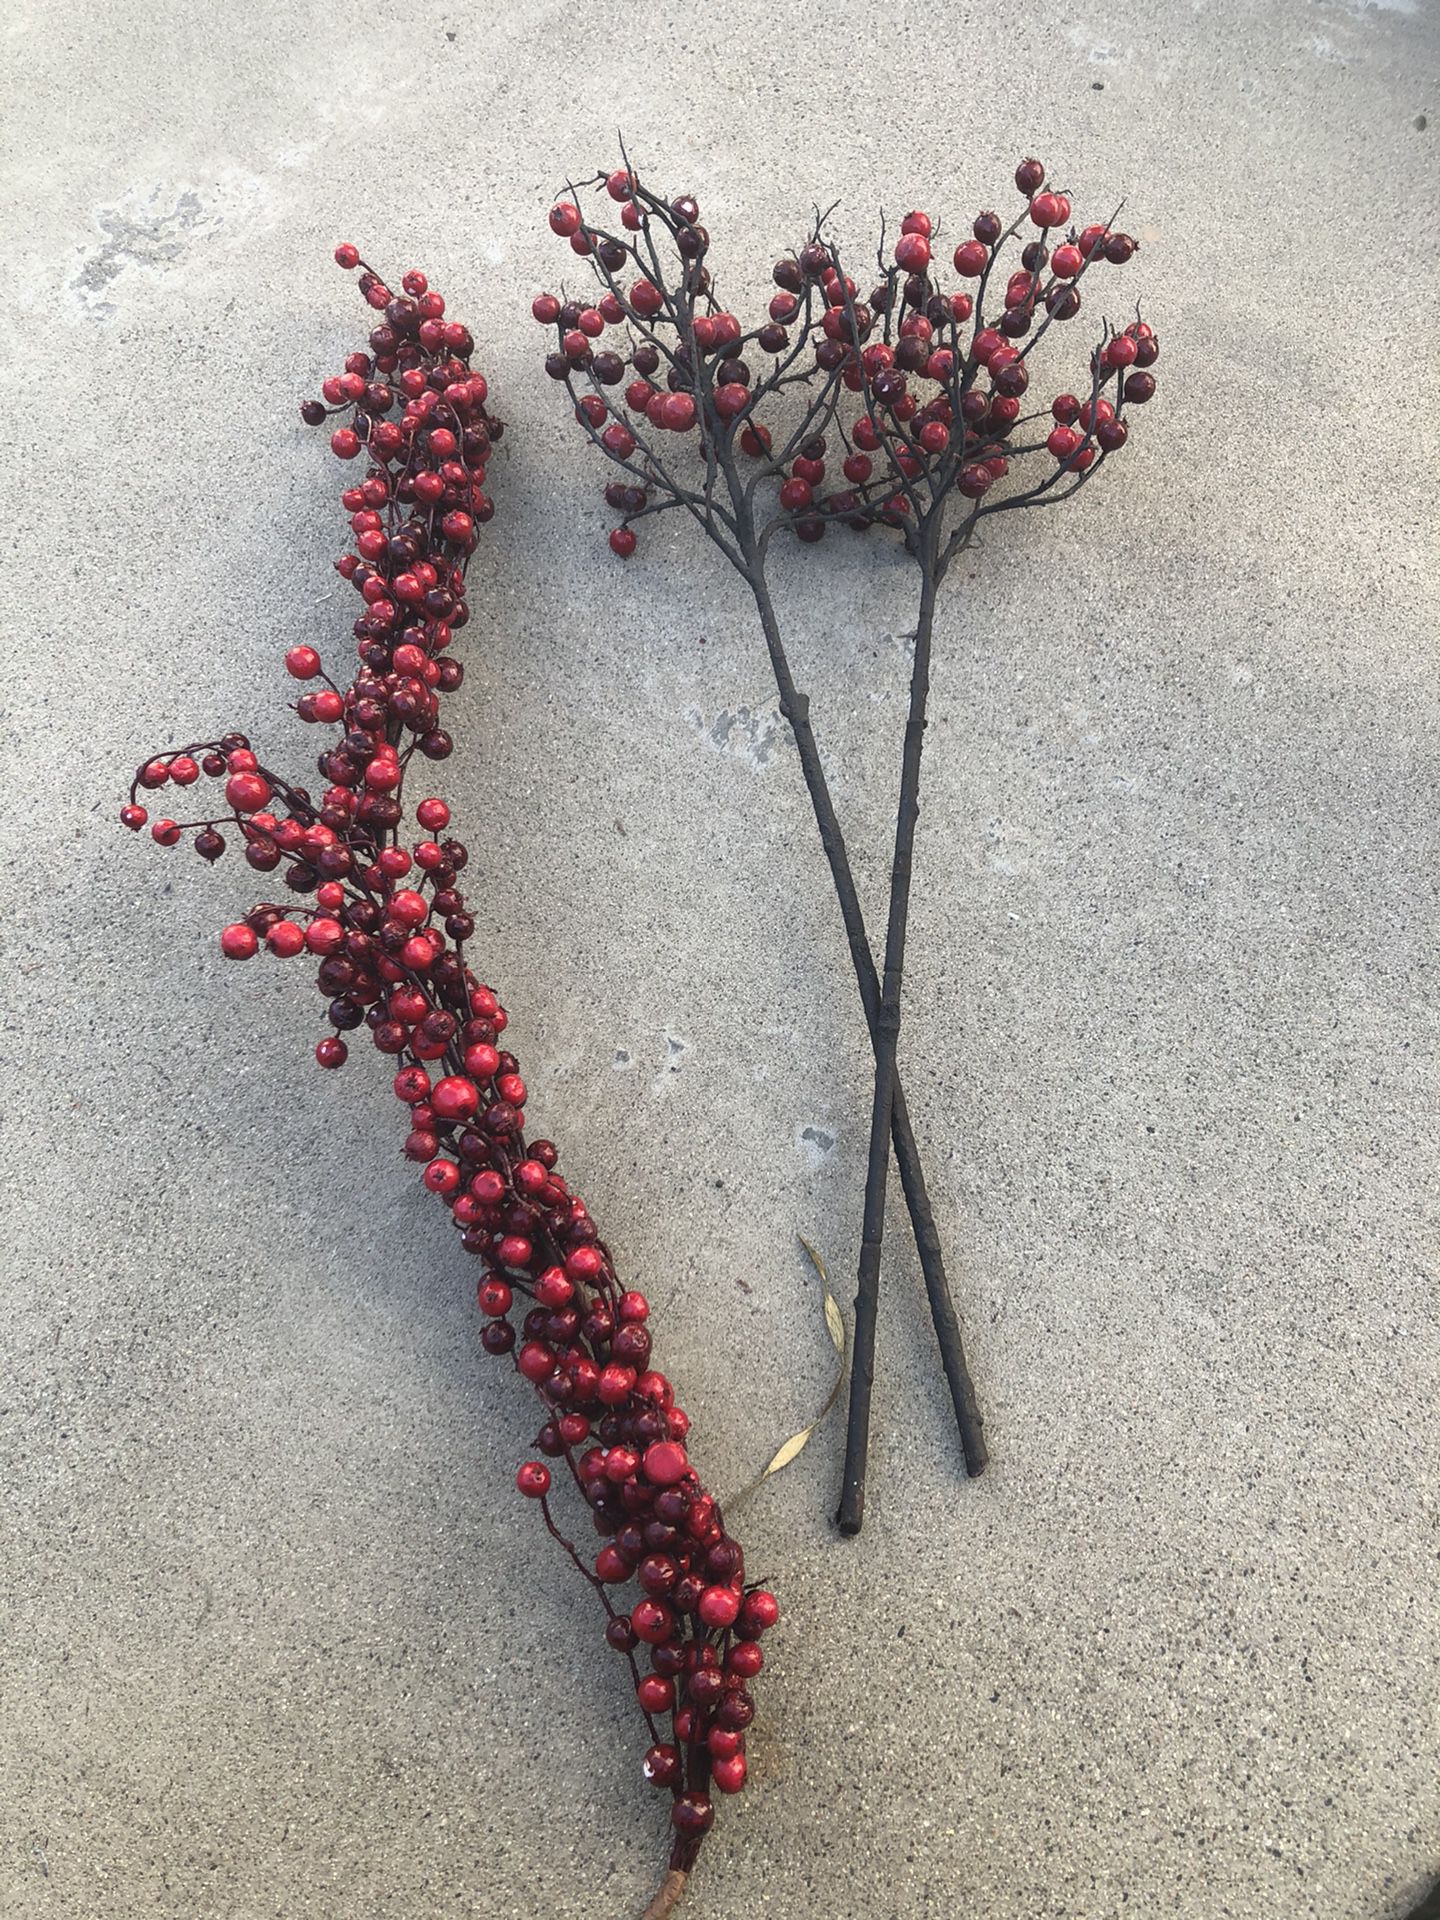 Crate and barrel red berry garland and vase stems